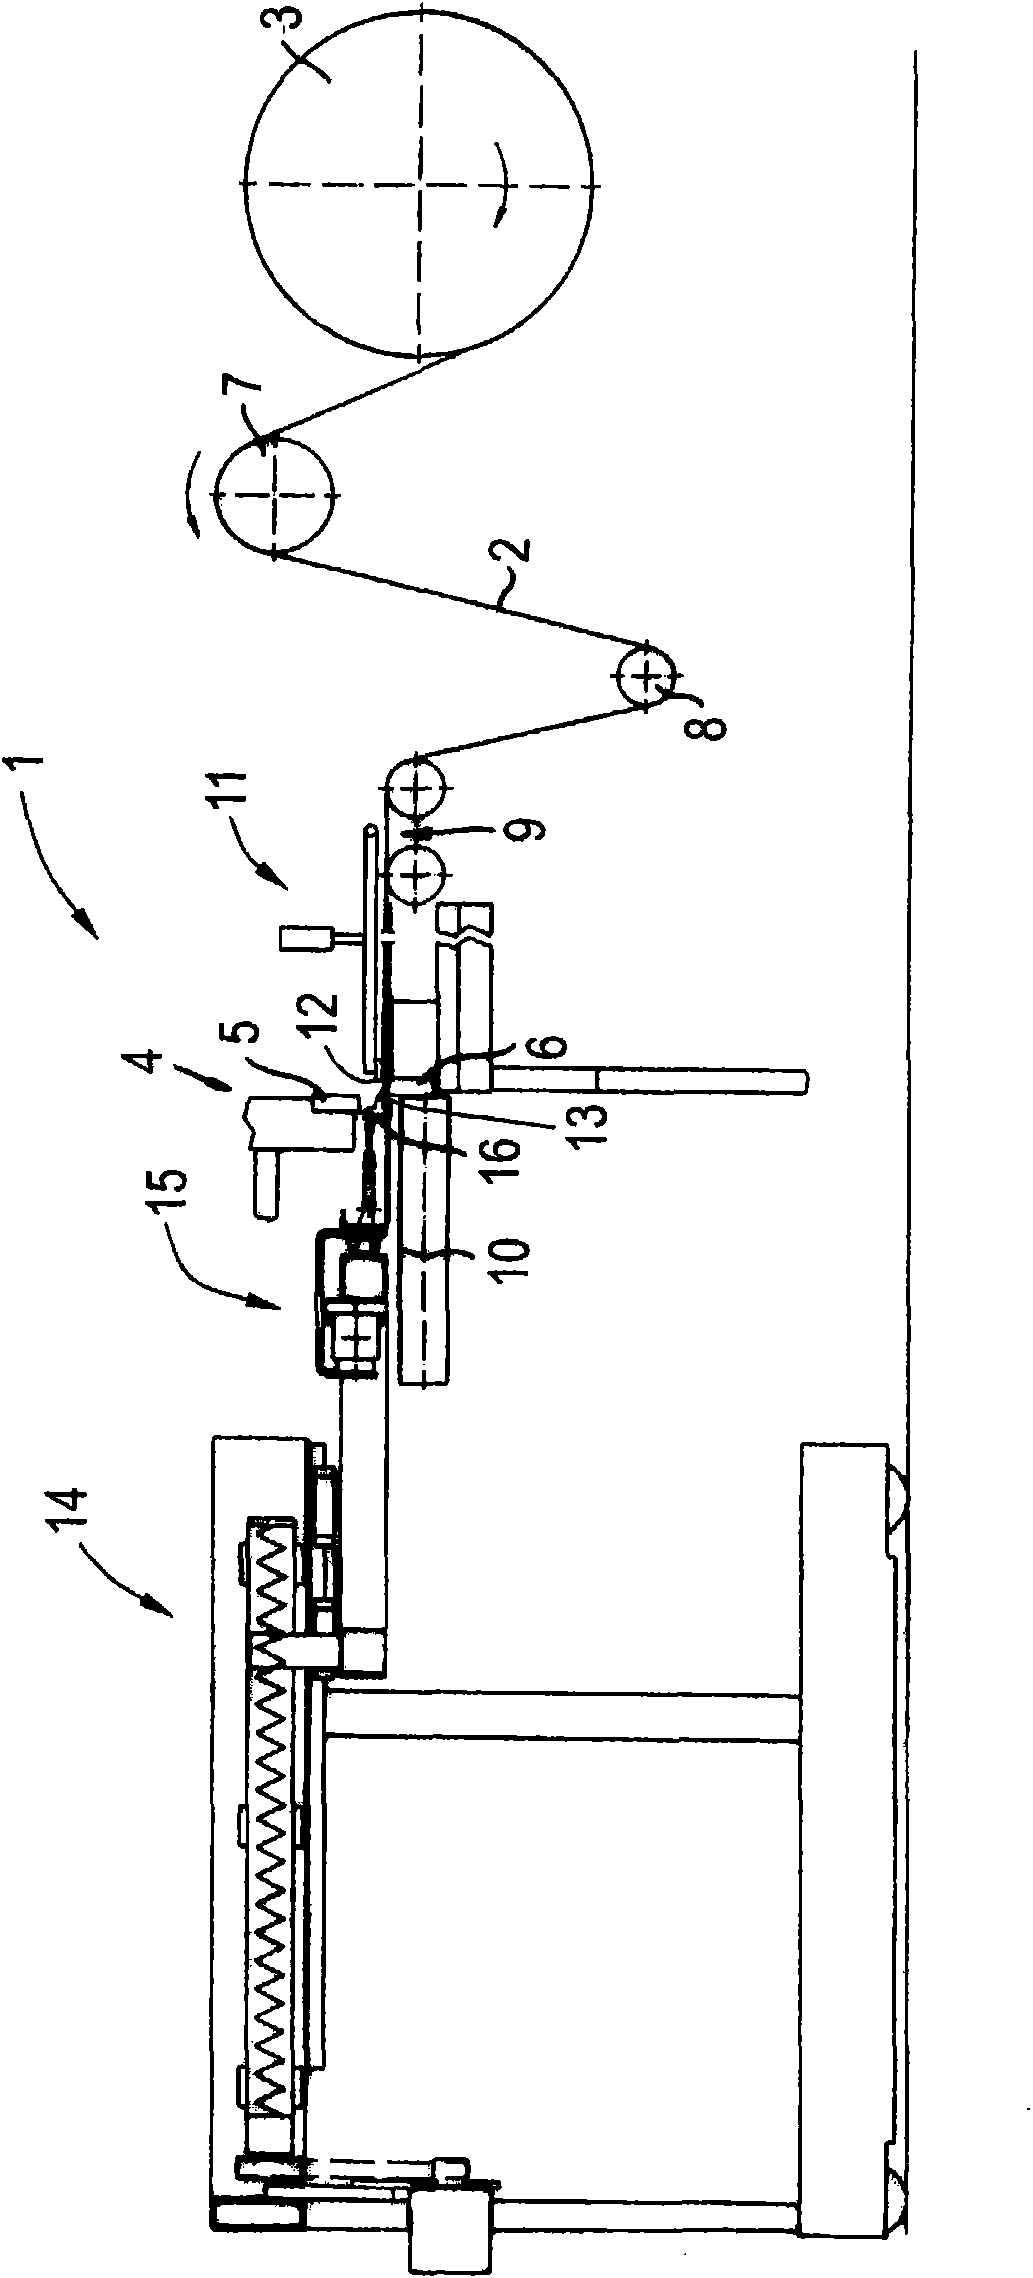 Cutting device for cutting a thin and adhesive belt, in particular a cord belt